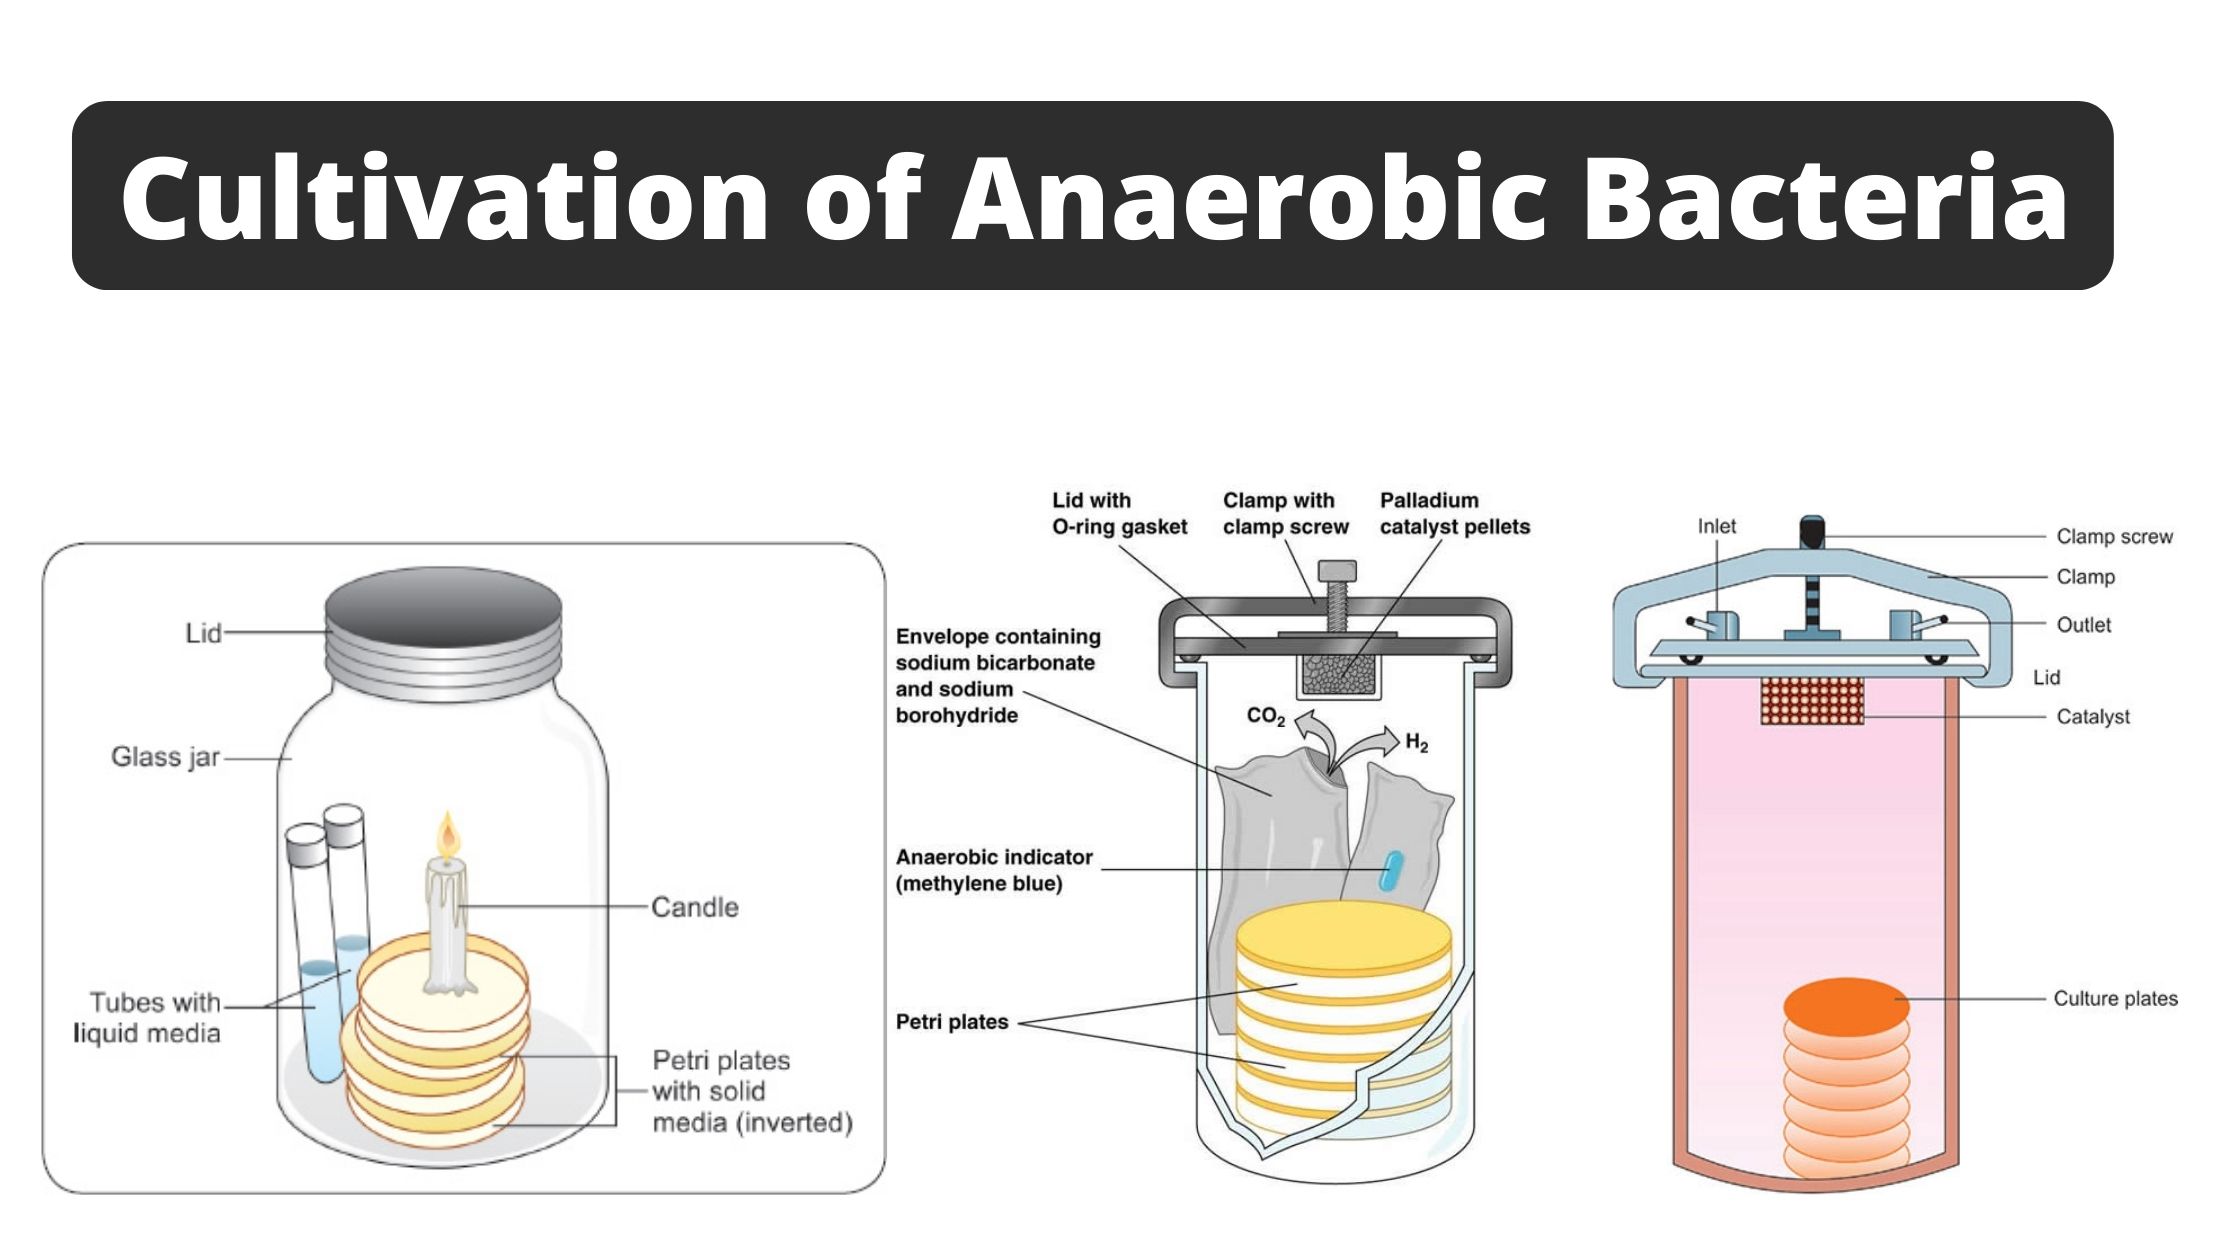 Cultivation of Anaerobic Bacteria